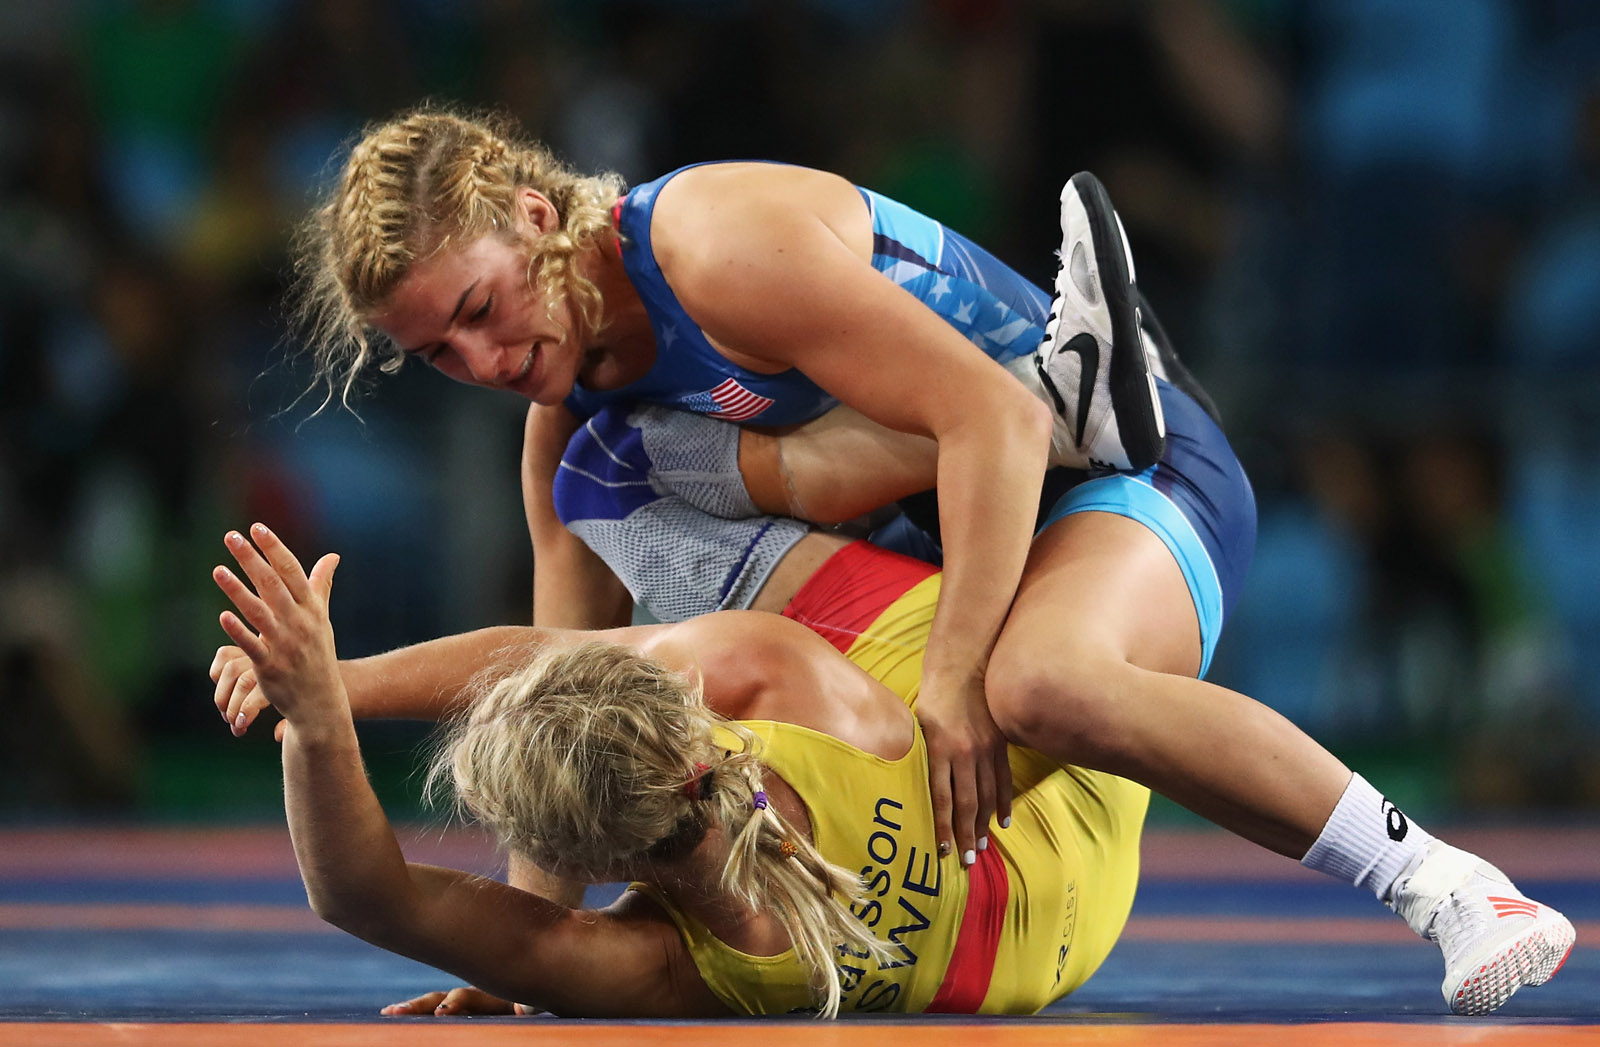 RIO DE JANEIRO, BRAZIL - AUGUST 18: Helen Louise Maroulis of the United States (blue) competes against Sofia Magdalena Mattsson of Sweden during the Women's Freestyle 53 kg Semifinals on Day 13 of the Rio 2016 Olympic Games at Carioca Arena 2 on August 18, 2016 in Rio de Janeiro, Brazil.  (Photo by Julian Finney/Getty Images)